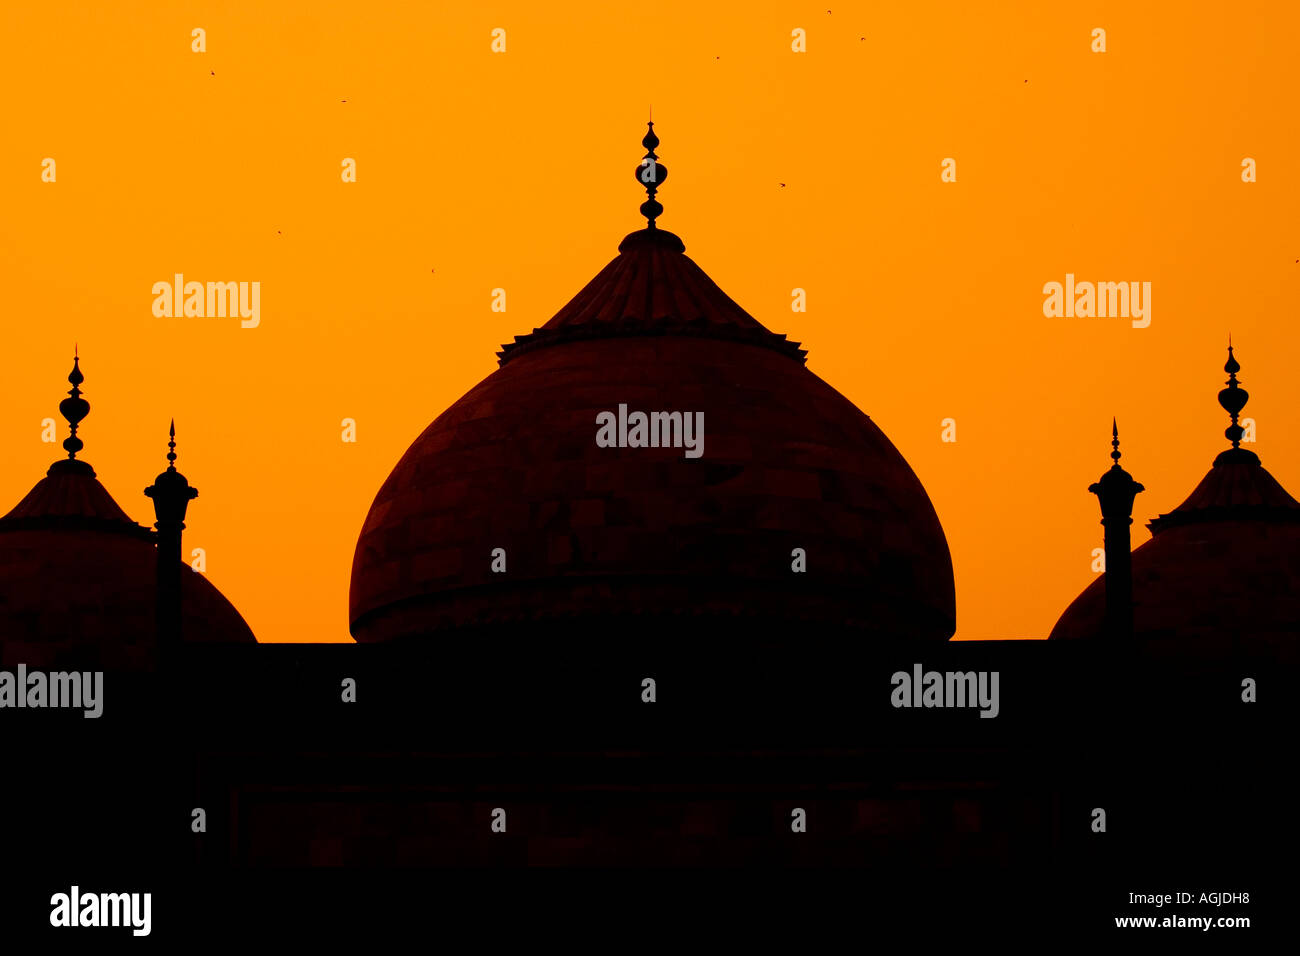 asia india details of the taj mahal mosques during sunset Stock Photo